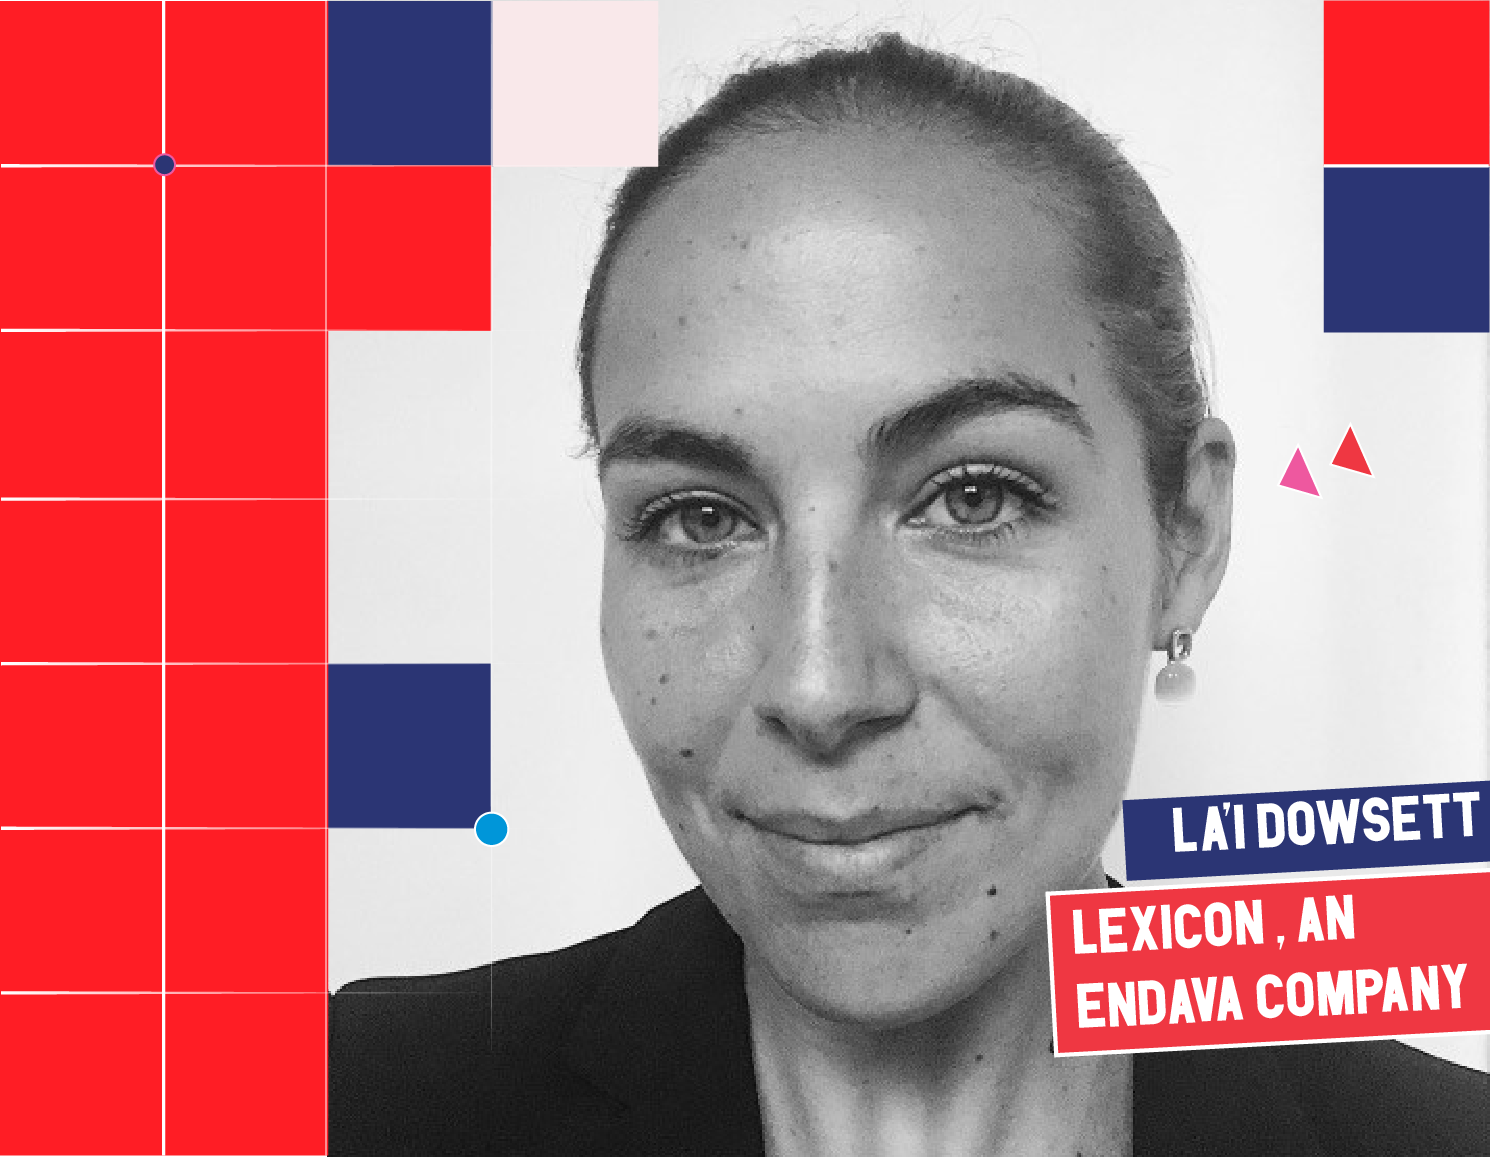 A black and white photograph of La'I Dowsett, a Caucasian woman with hair styled in a bun, wearing a collared shirt. She is looking directly at the camera. Square Graphic elements border the image, and across the bottom right of the image, her name is included in block letters against a blue background. Underneath her name, LEXICON, AN ENDAVA COMPANY is written in white block letters against a red background.